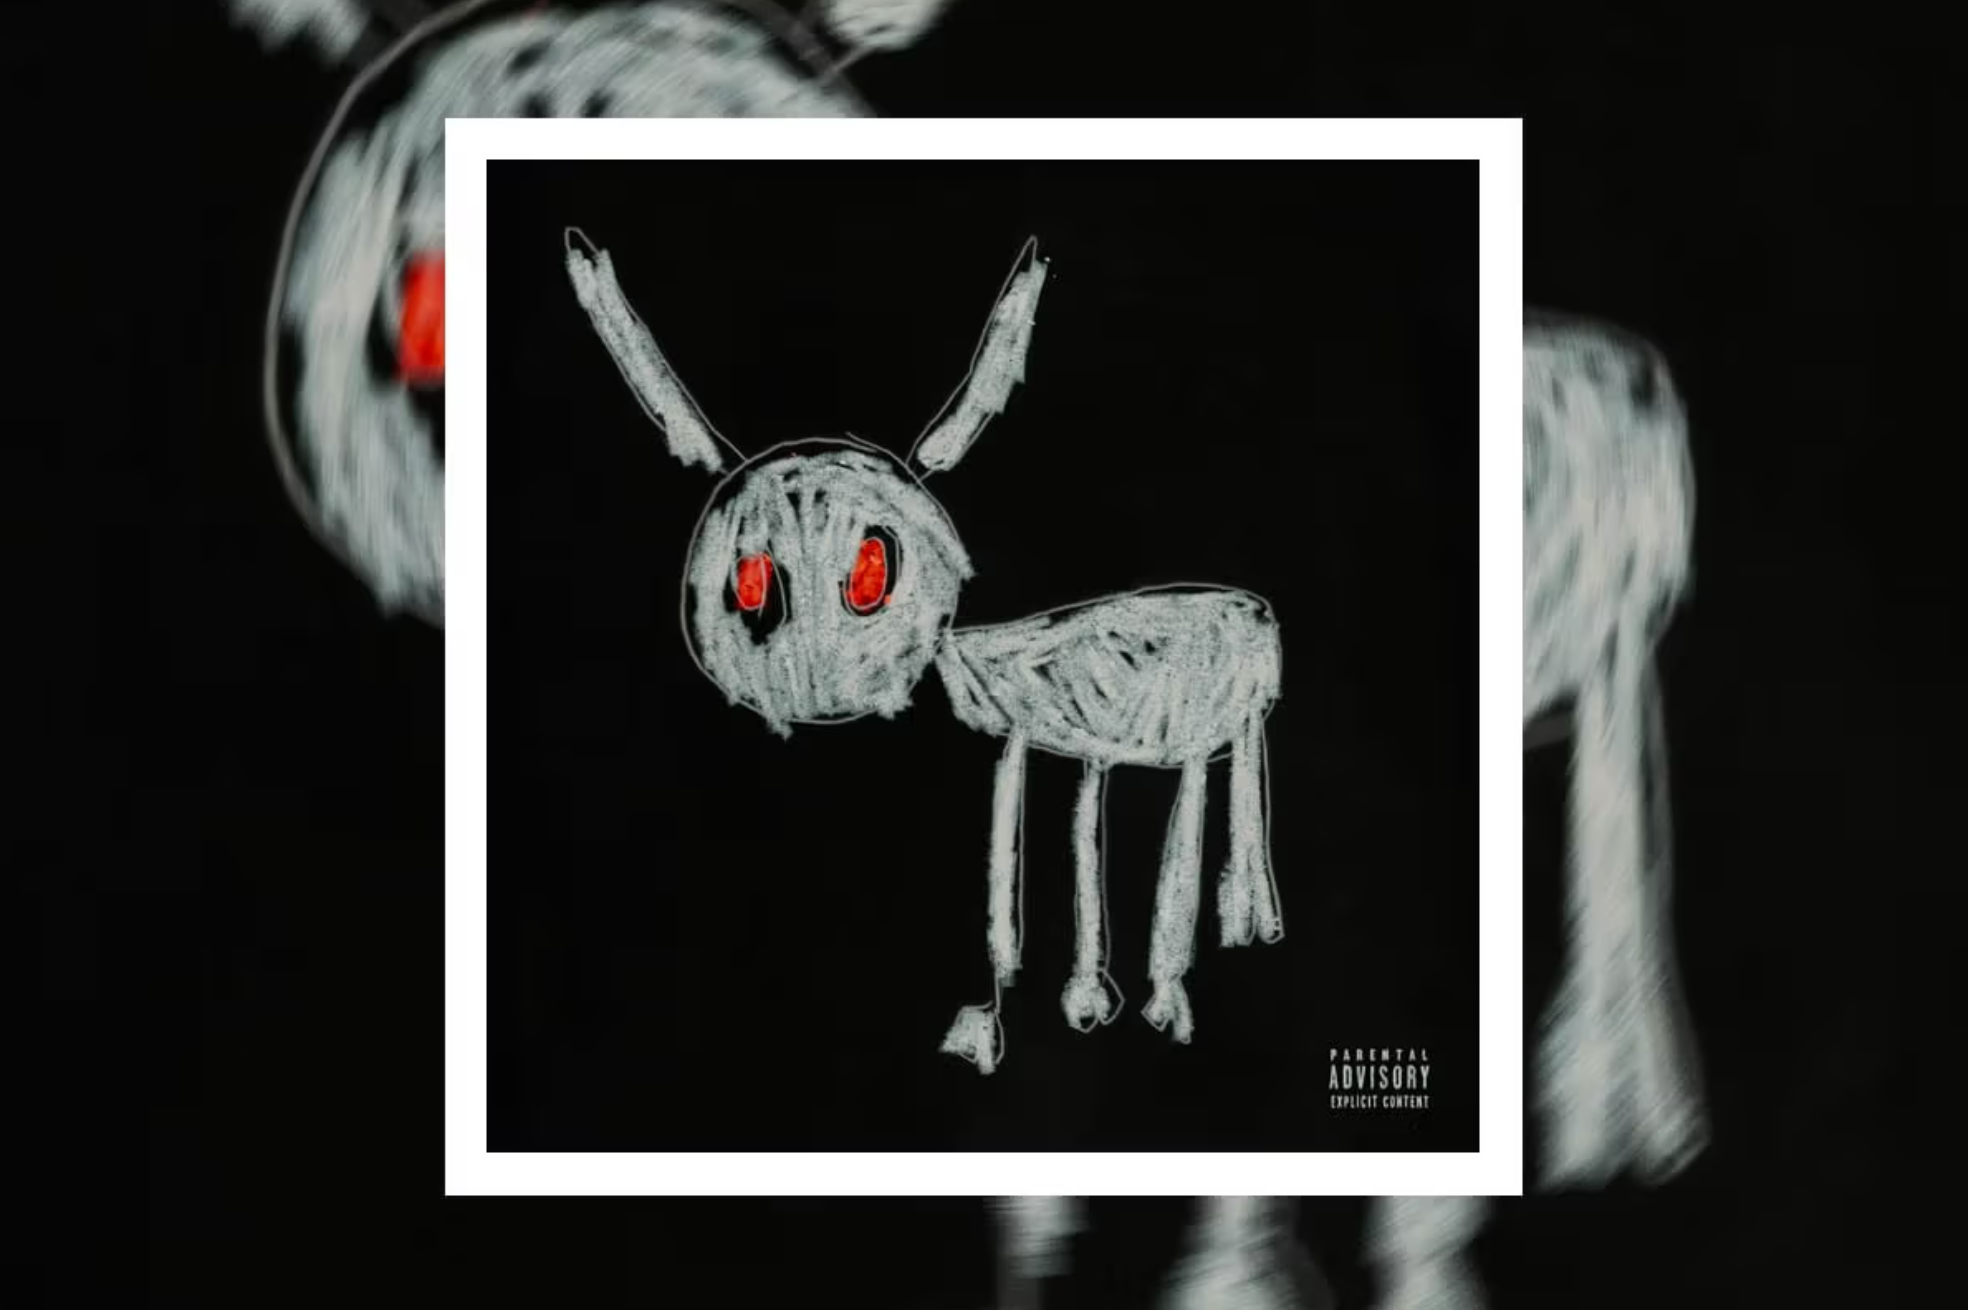 Drake has dropped off his highly-anticipated eight studio album, For All the Dogs Featuring guest appearances from Lil Yachty, Bad Bunny, Chief Keef more